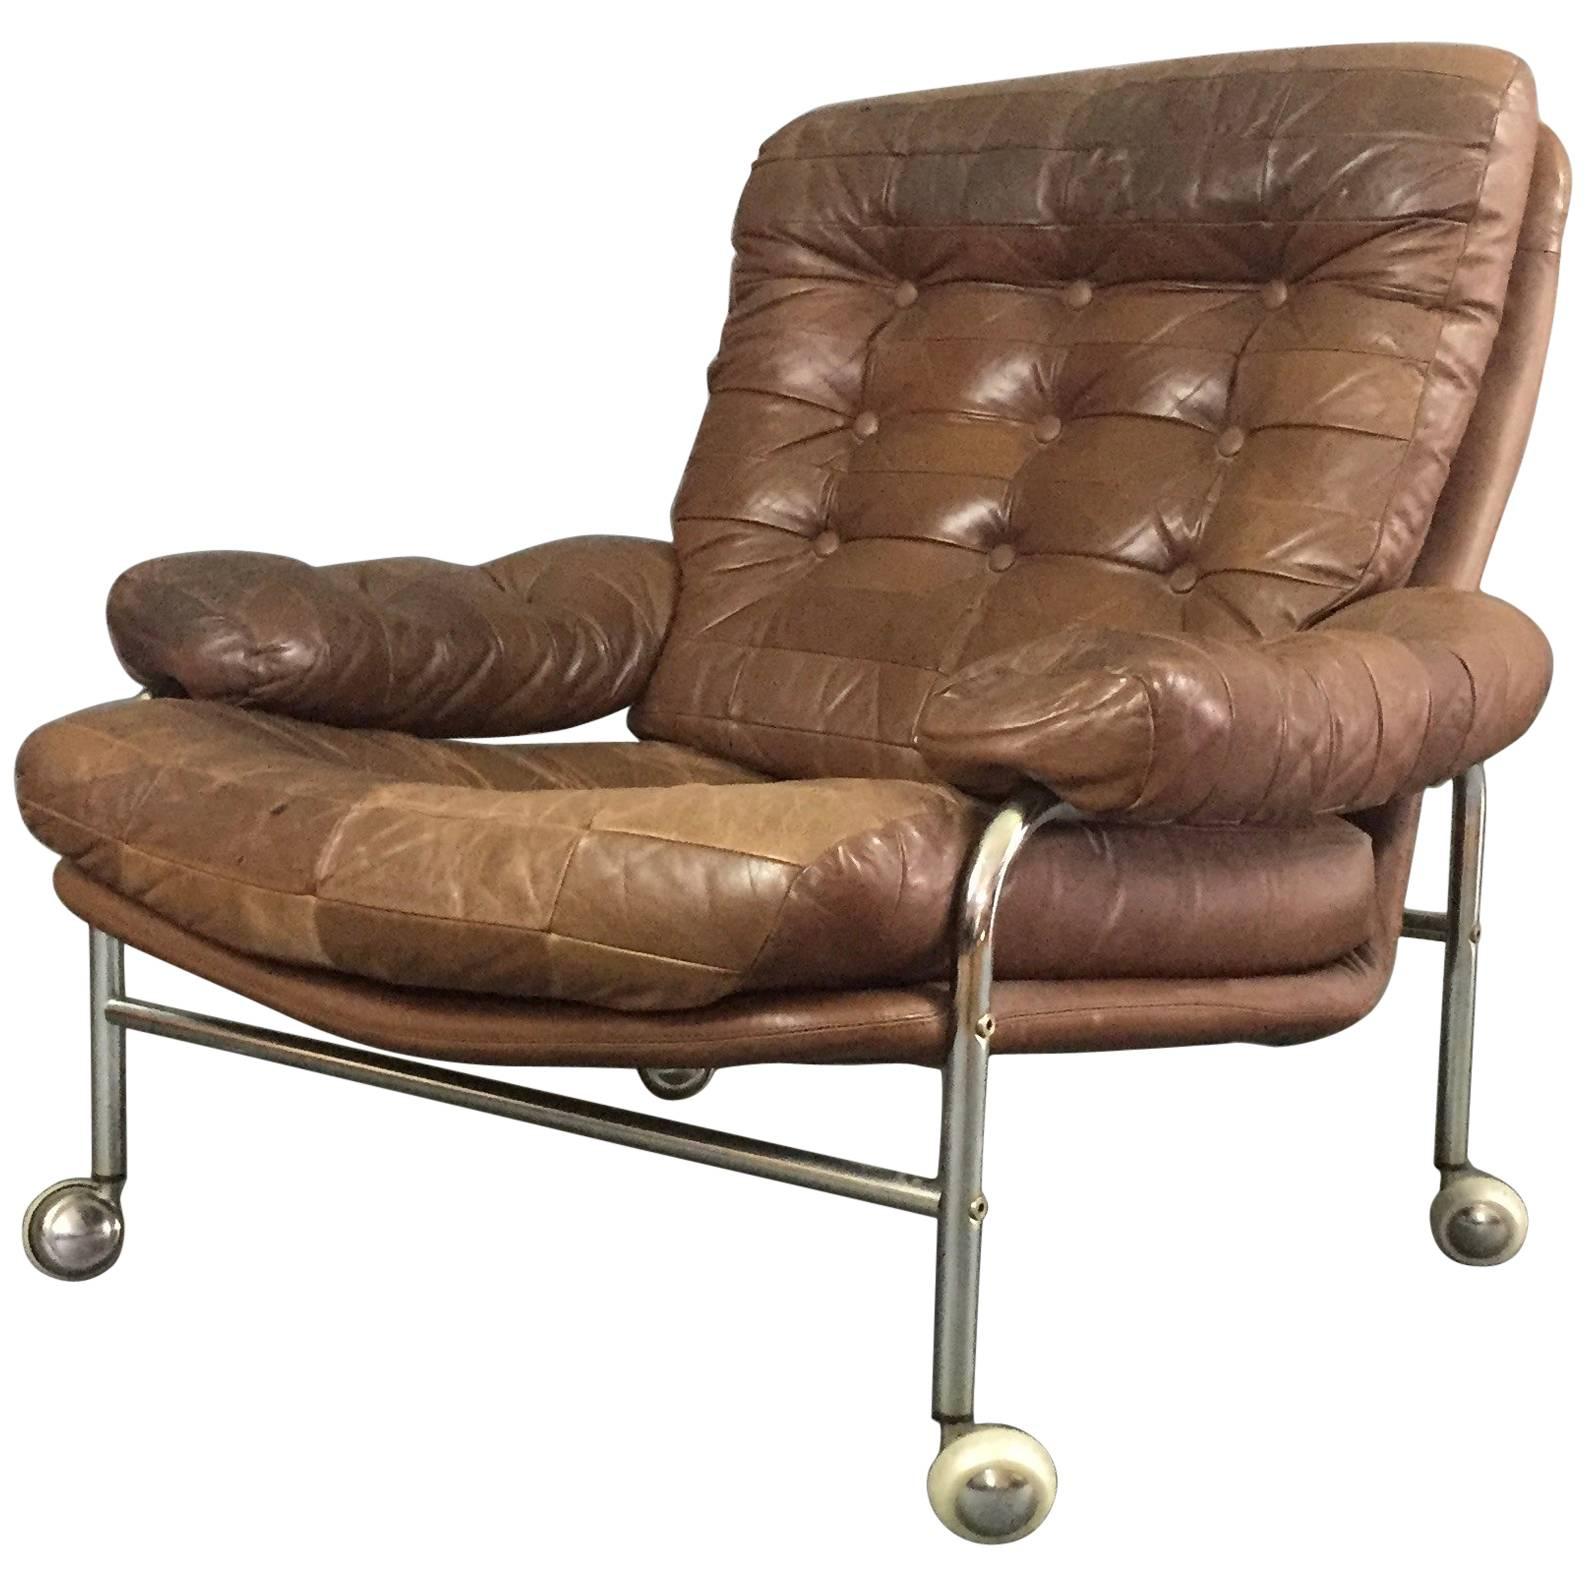 Scandinavian 1970s Leather and Chrome Lounge Chair For Sale